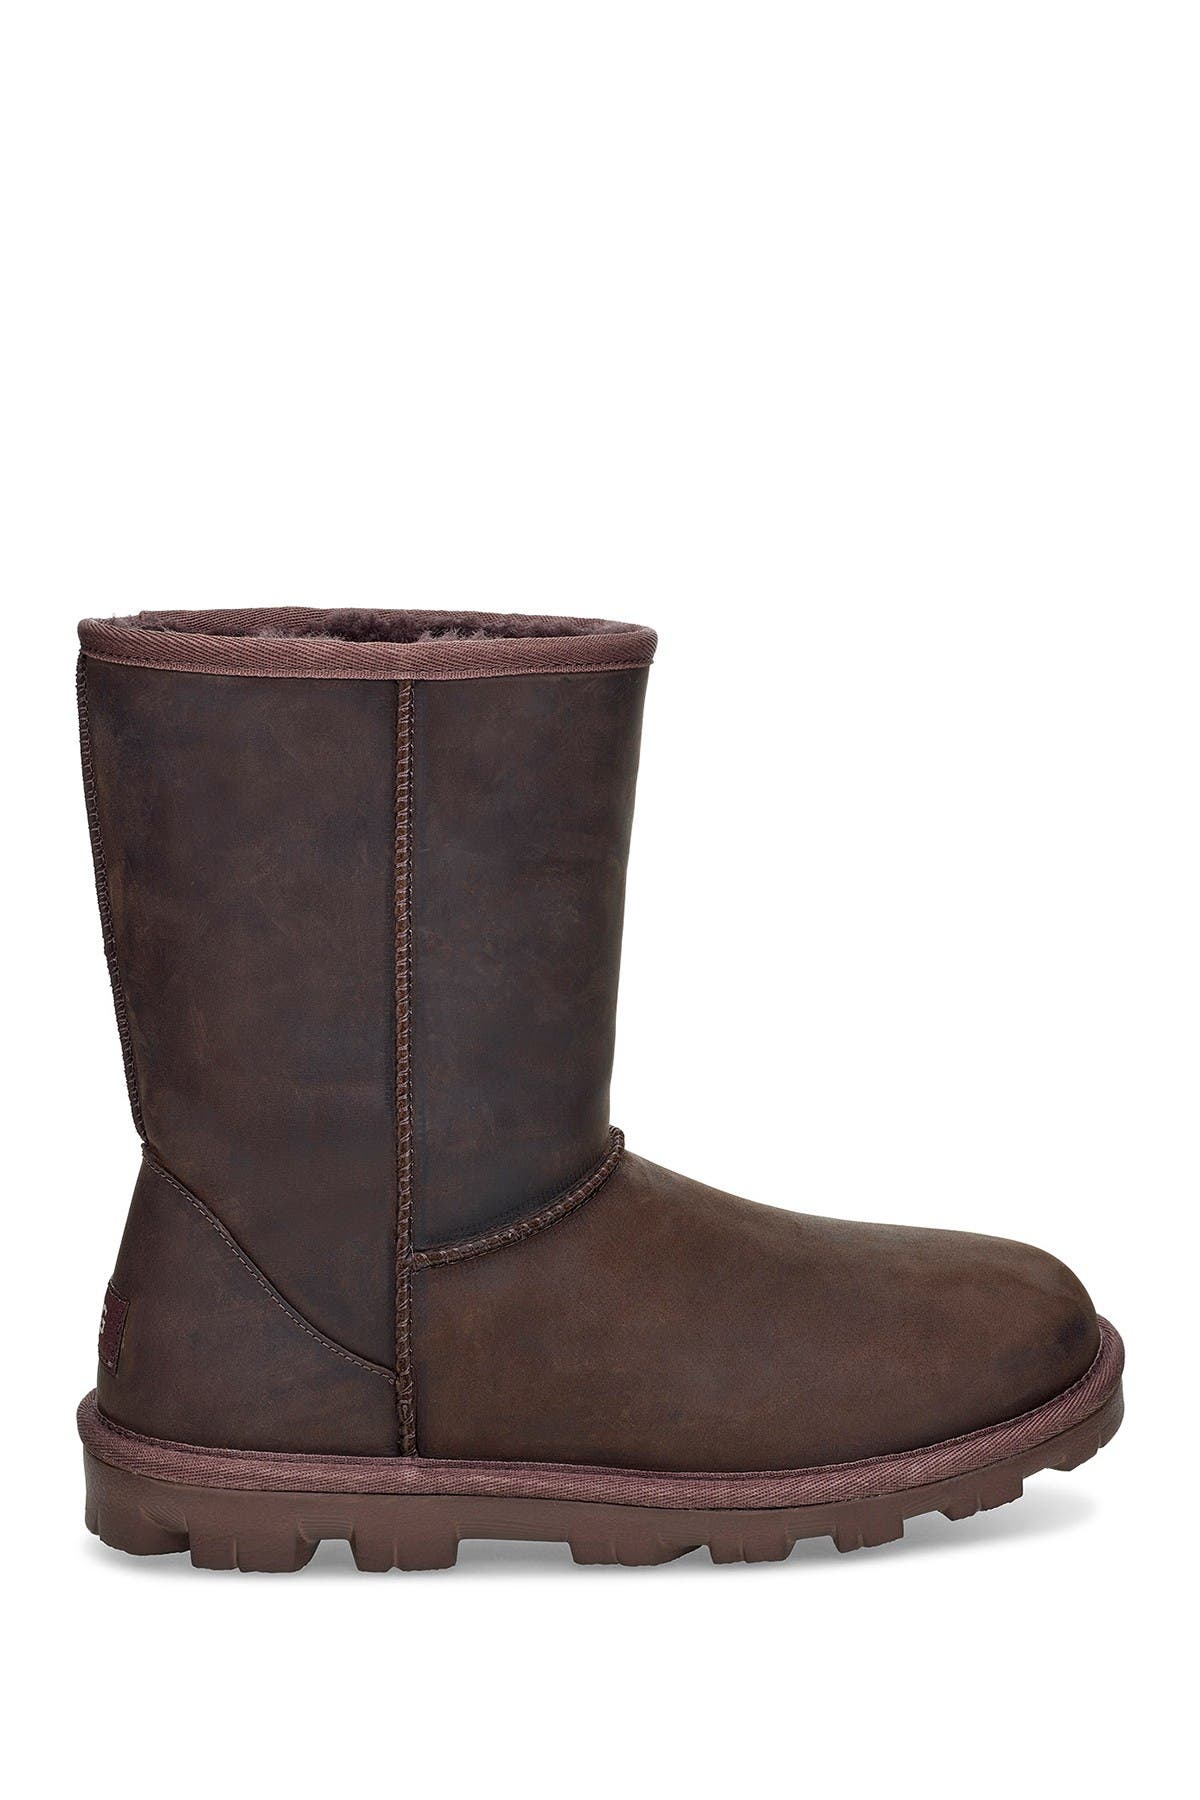 short leather uggs